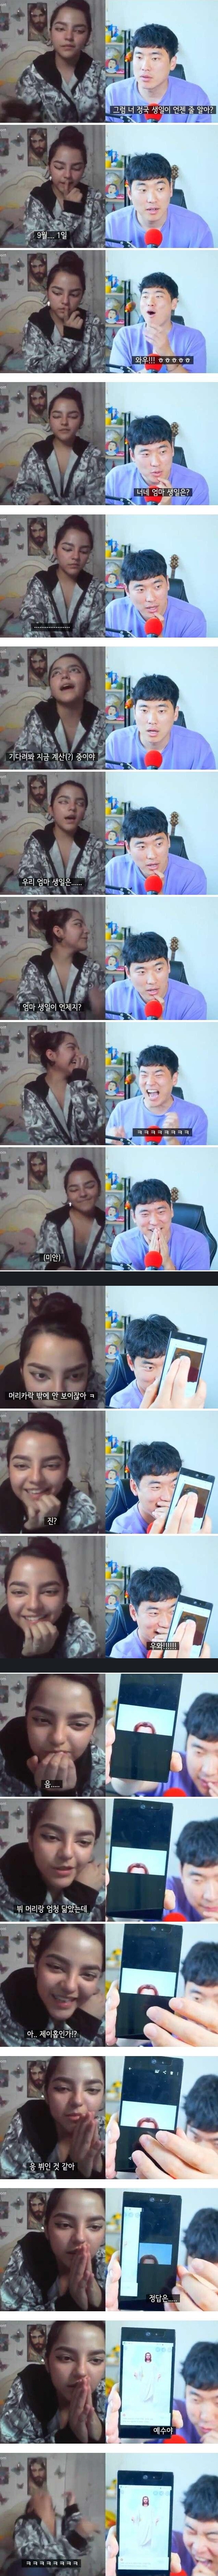 Video chat with a Latin girl.jpg